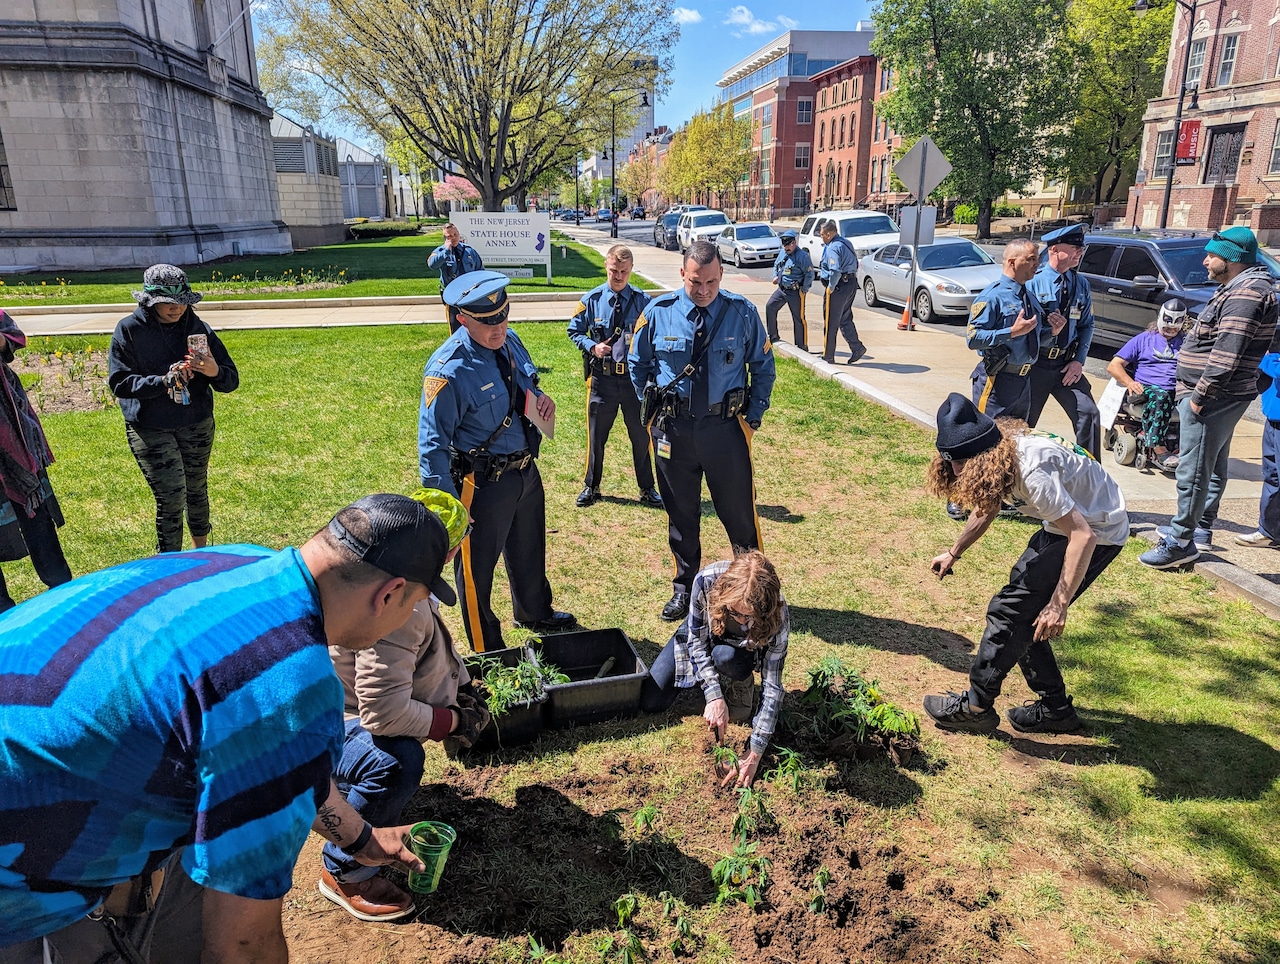 You cant grow weed at home, so they planted it on the Statehouse lawn [Video]